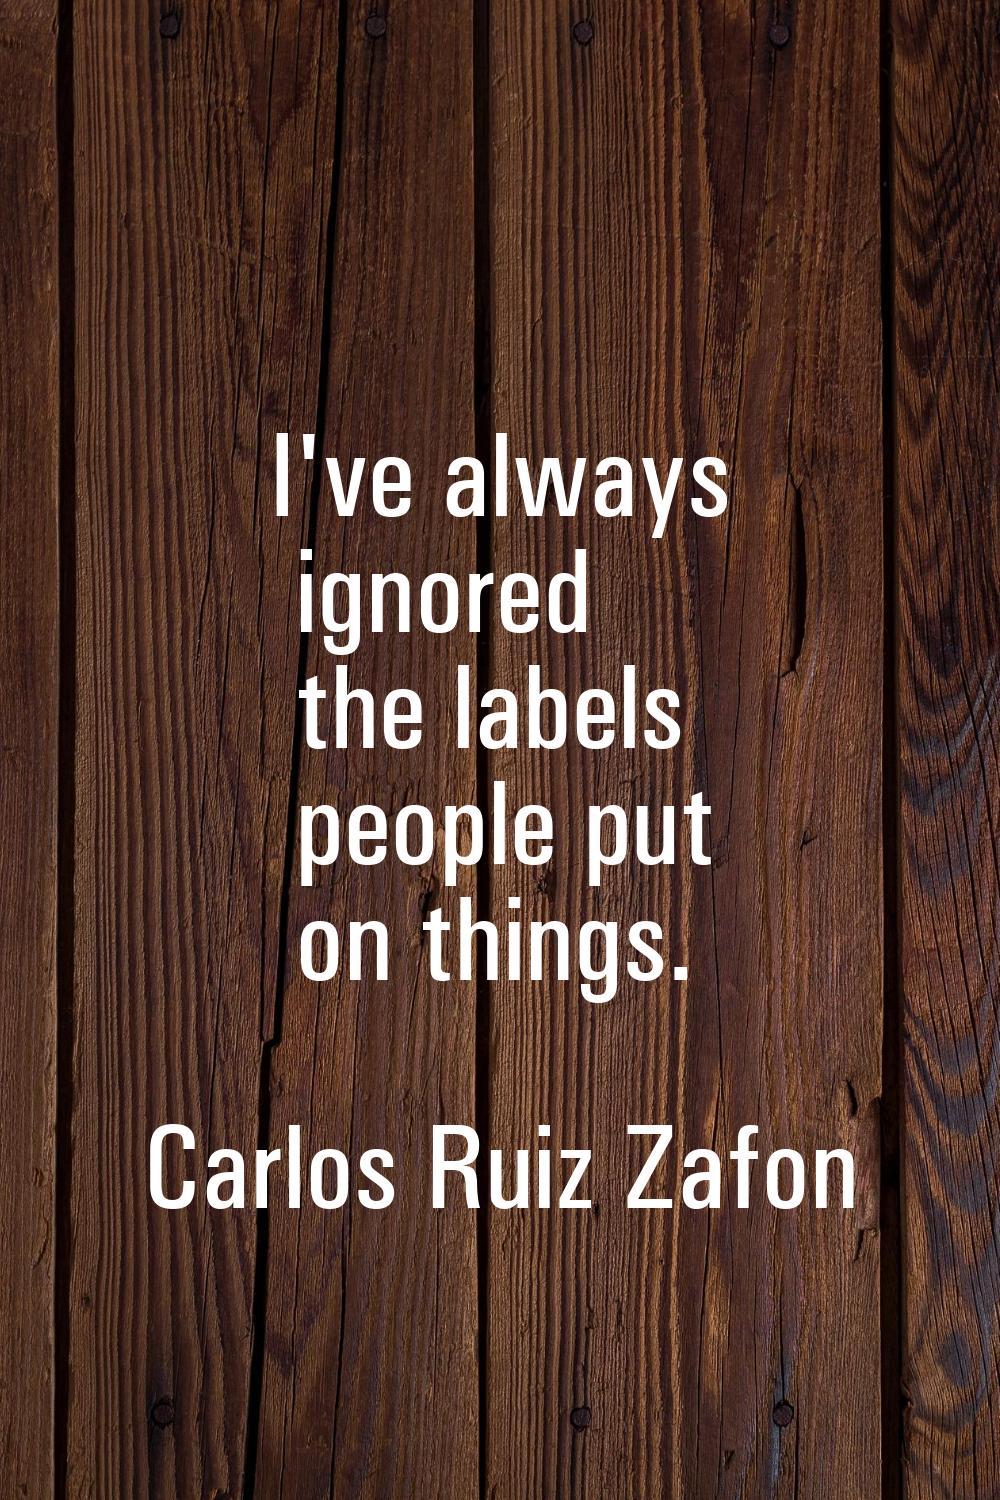 I've always ignored the labels people put on things.